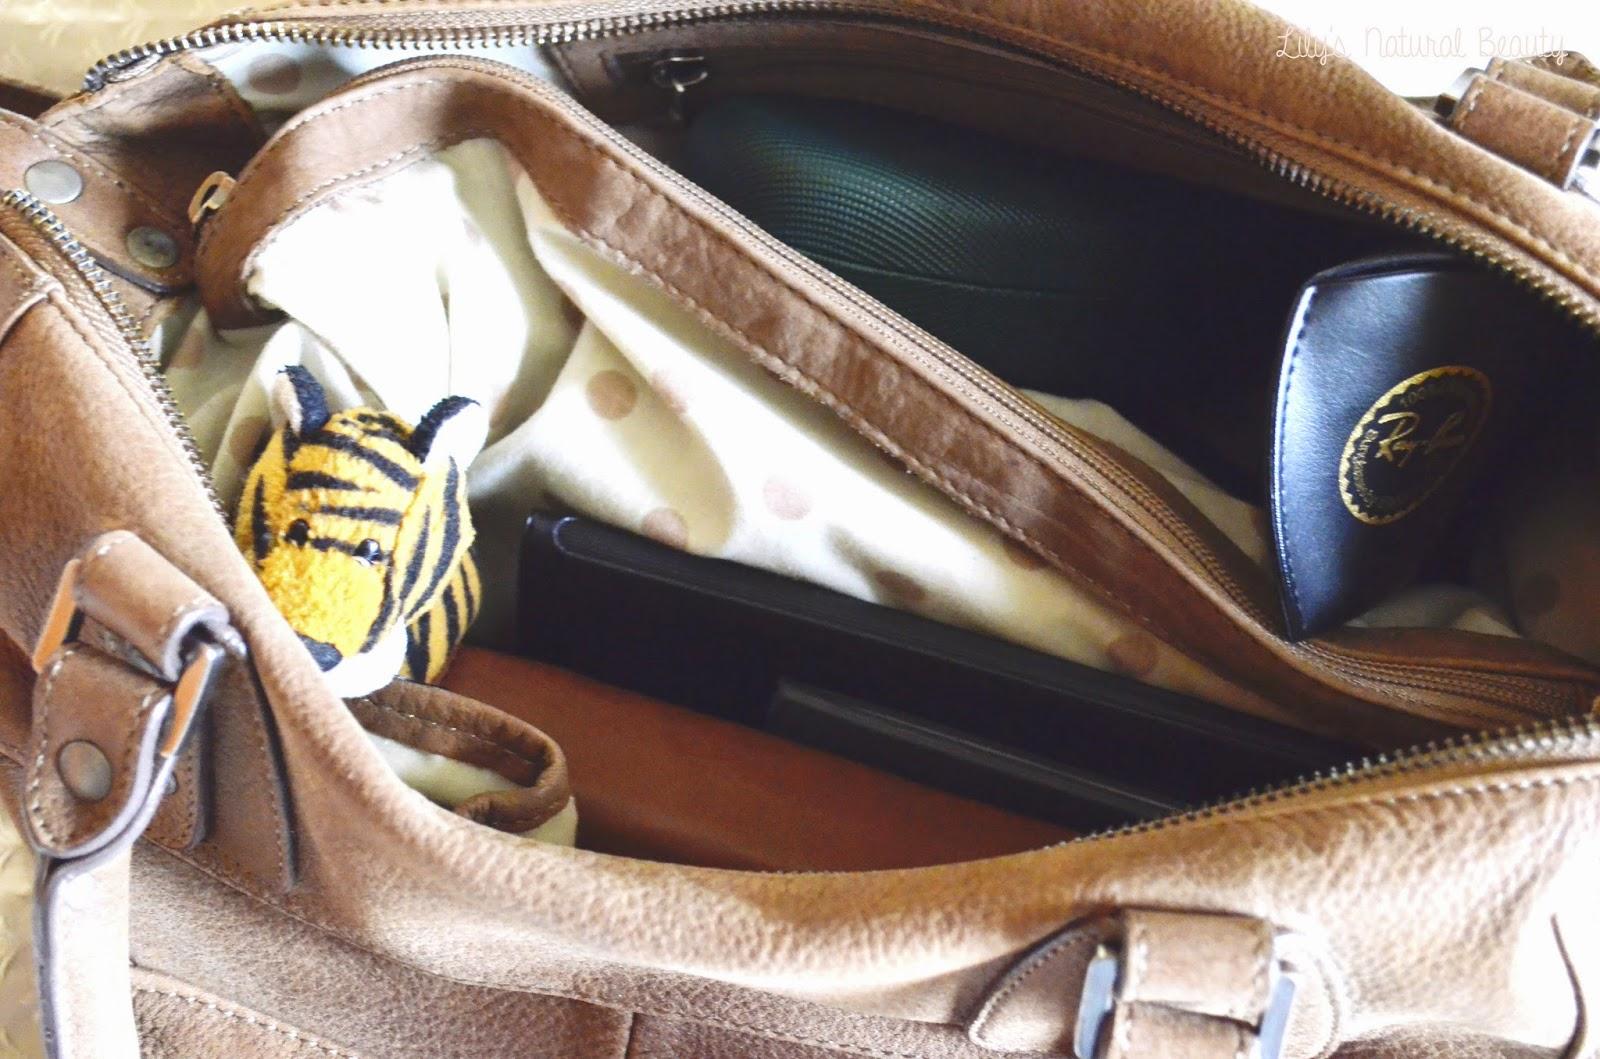 ❀ Tag: What's In My Bag!